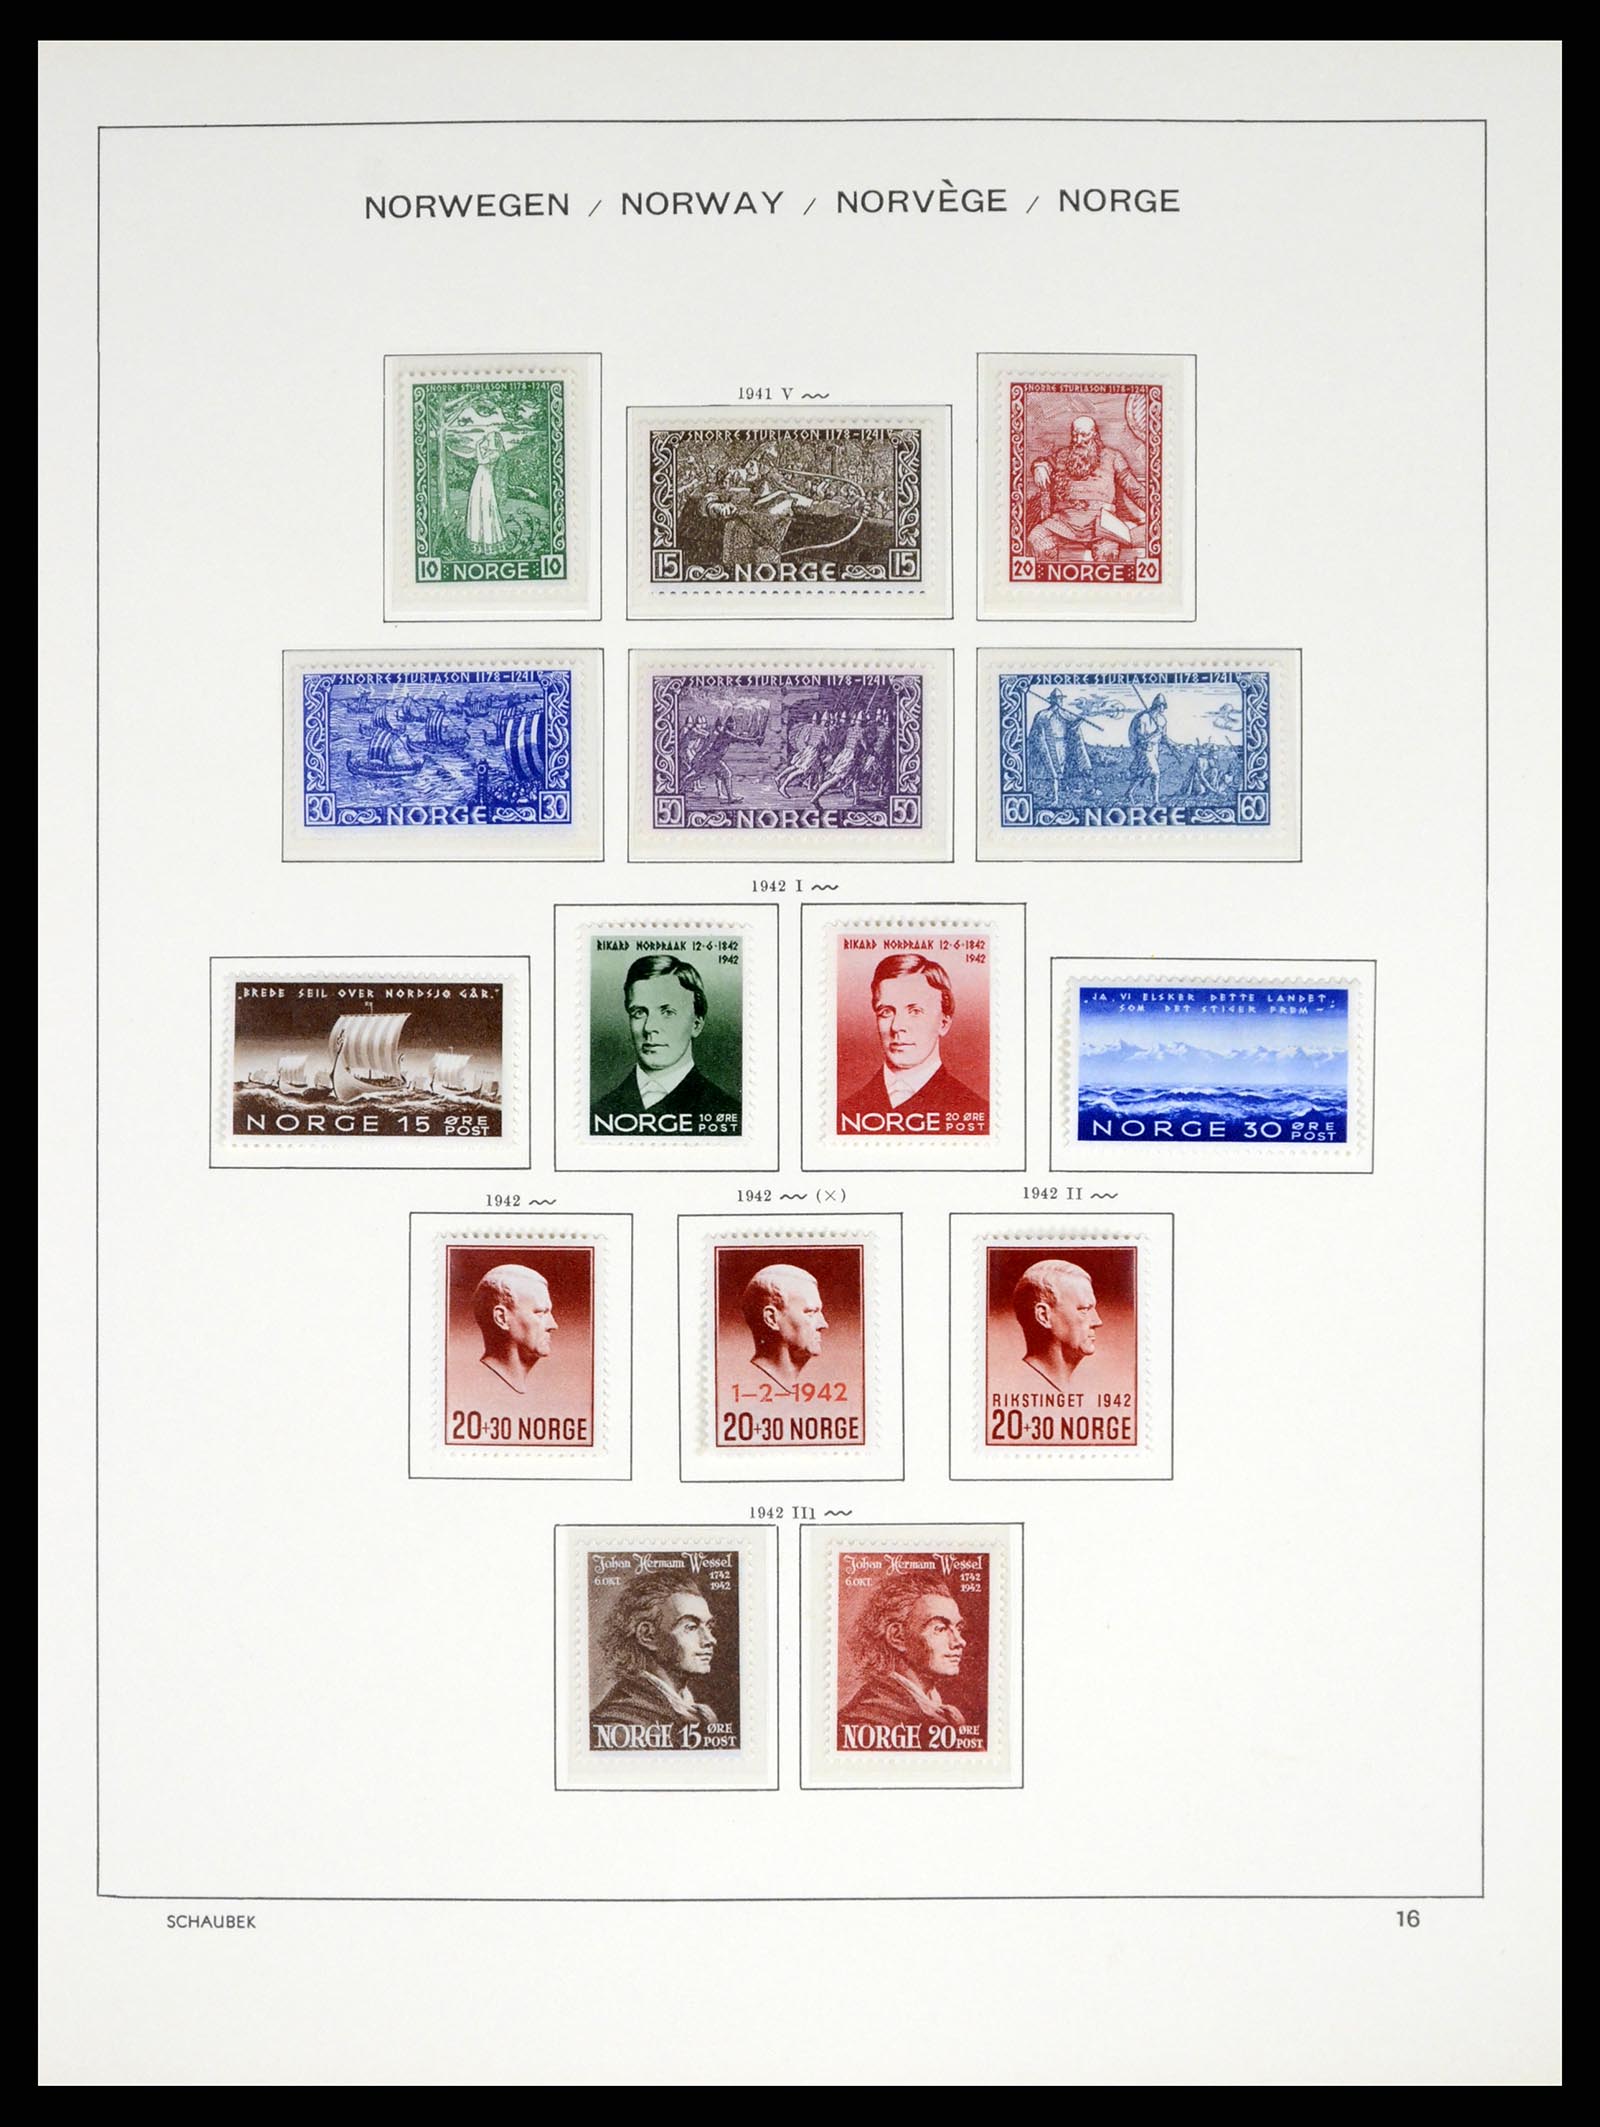 37544 015 - Stamp collection 37544 Norway 1855-2014.